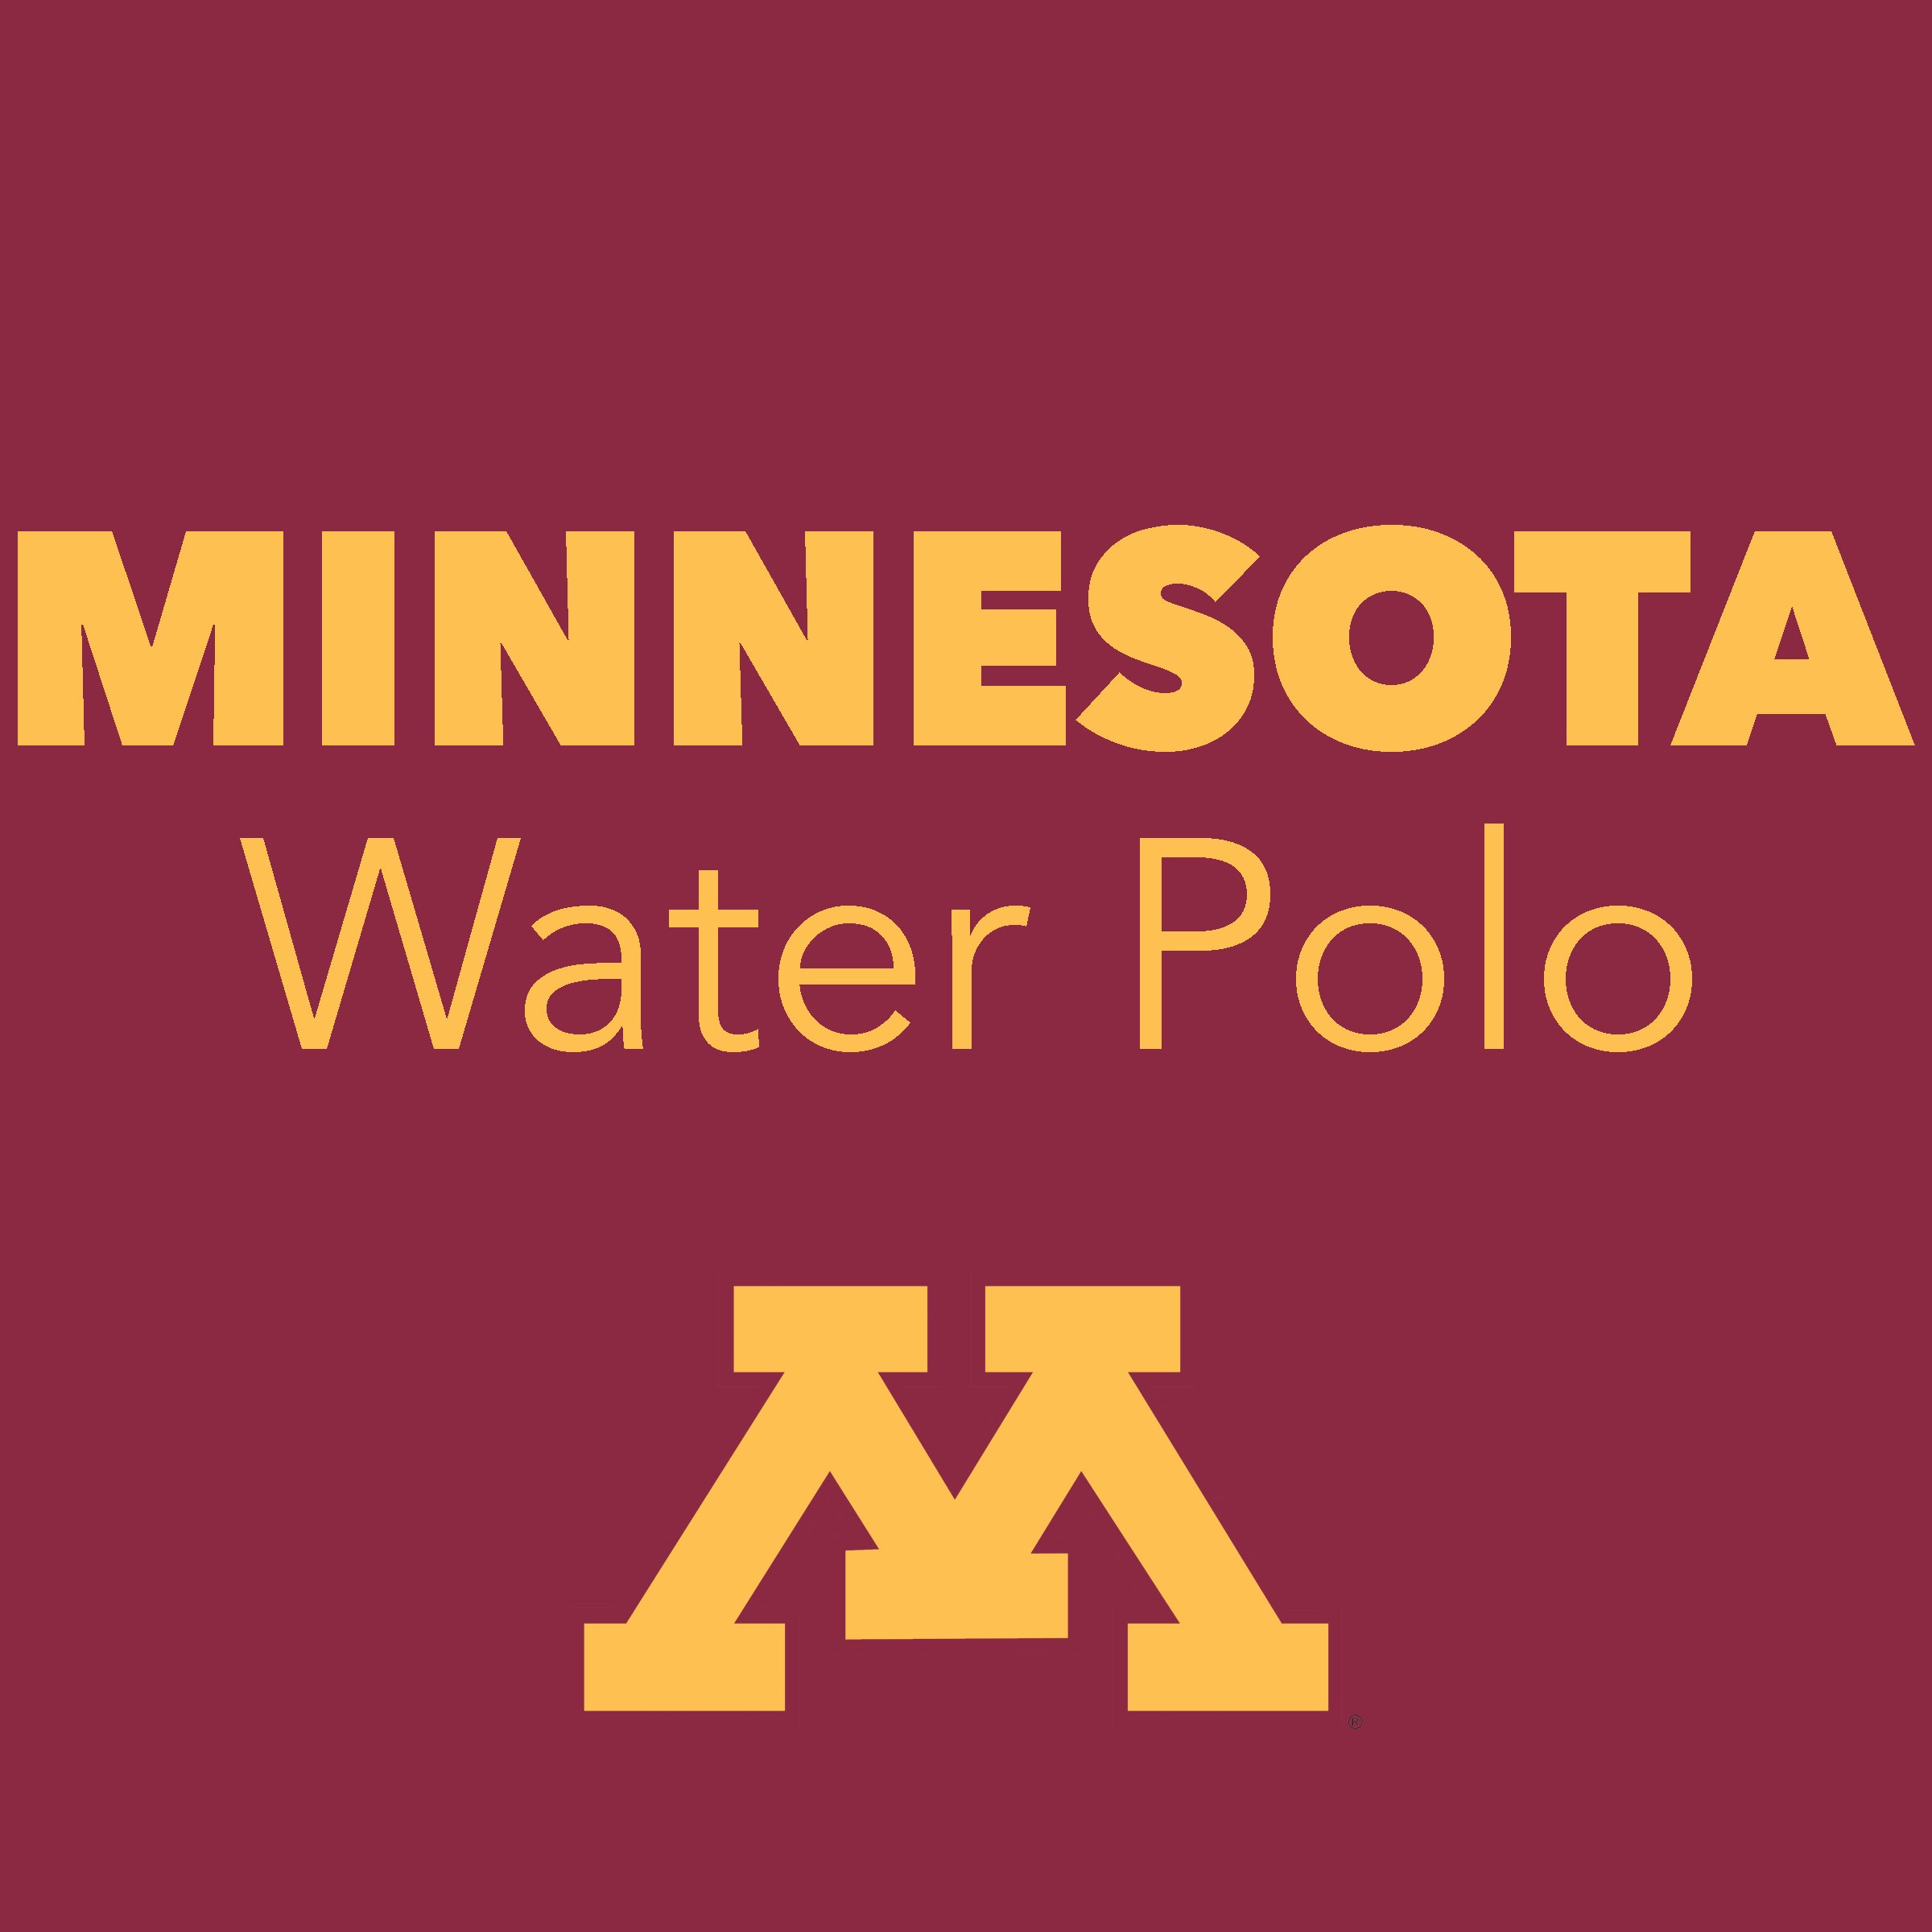 Official Twitter Account Of The University Of Minnesota Water Polo Team. #gopherpolo
#AllIn